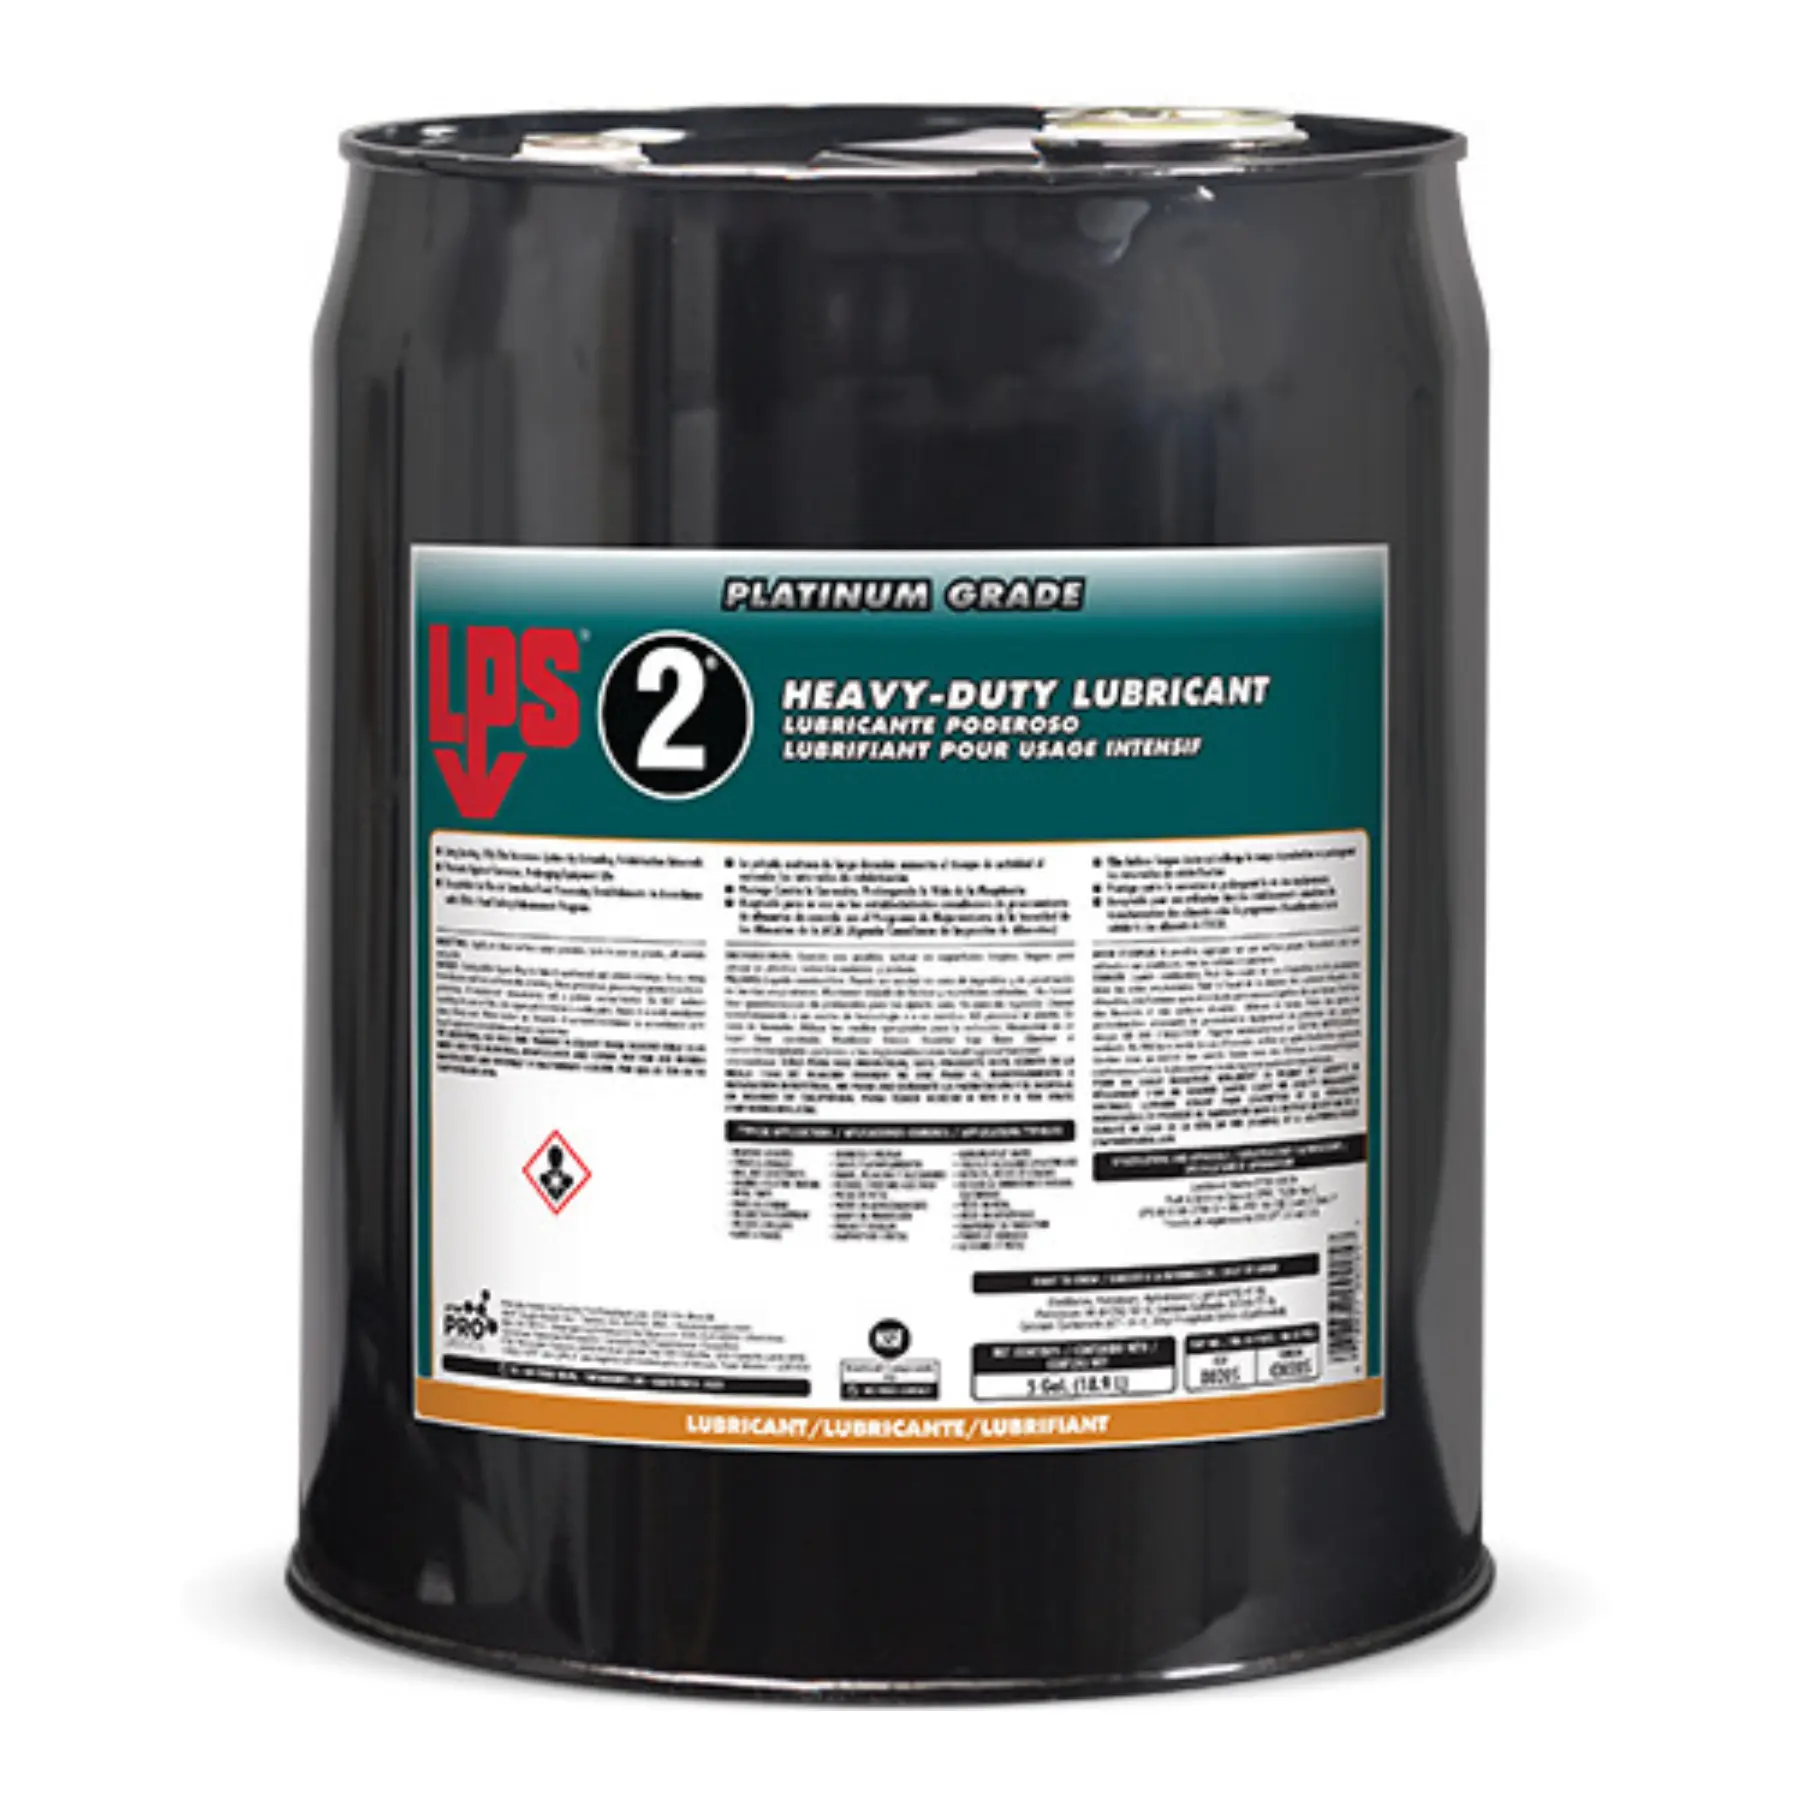 LPS 2 HEAVY-DUTY LUBRICANT 00205